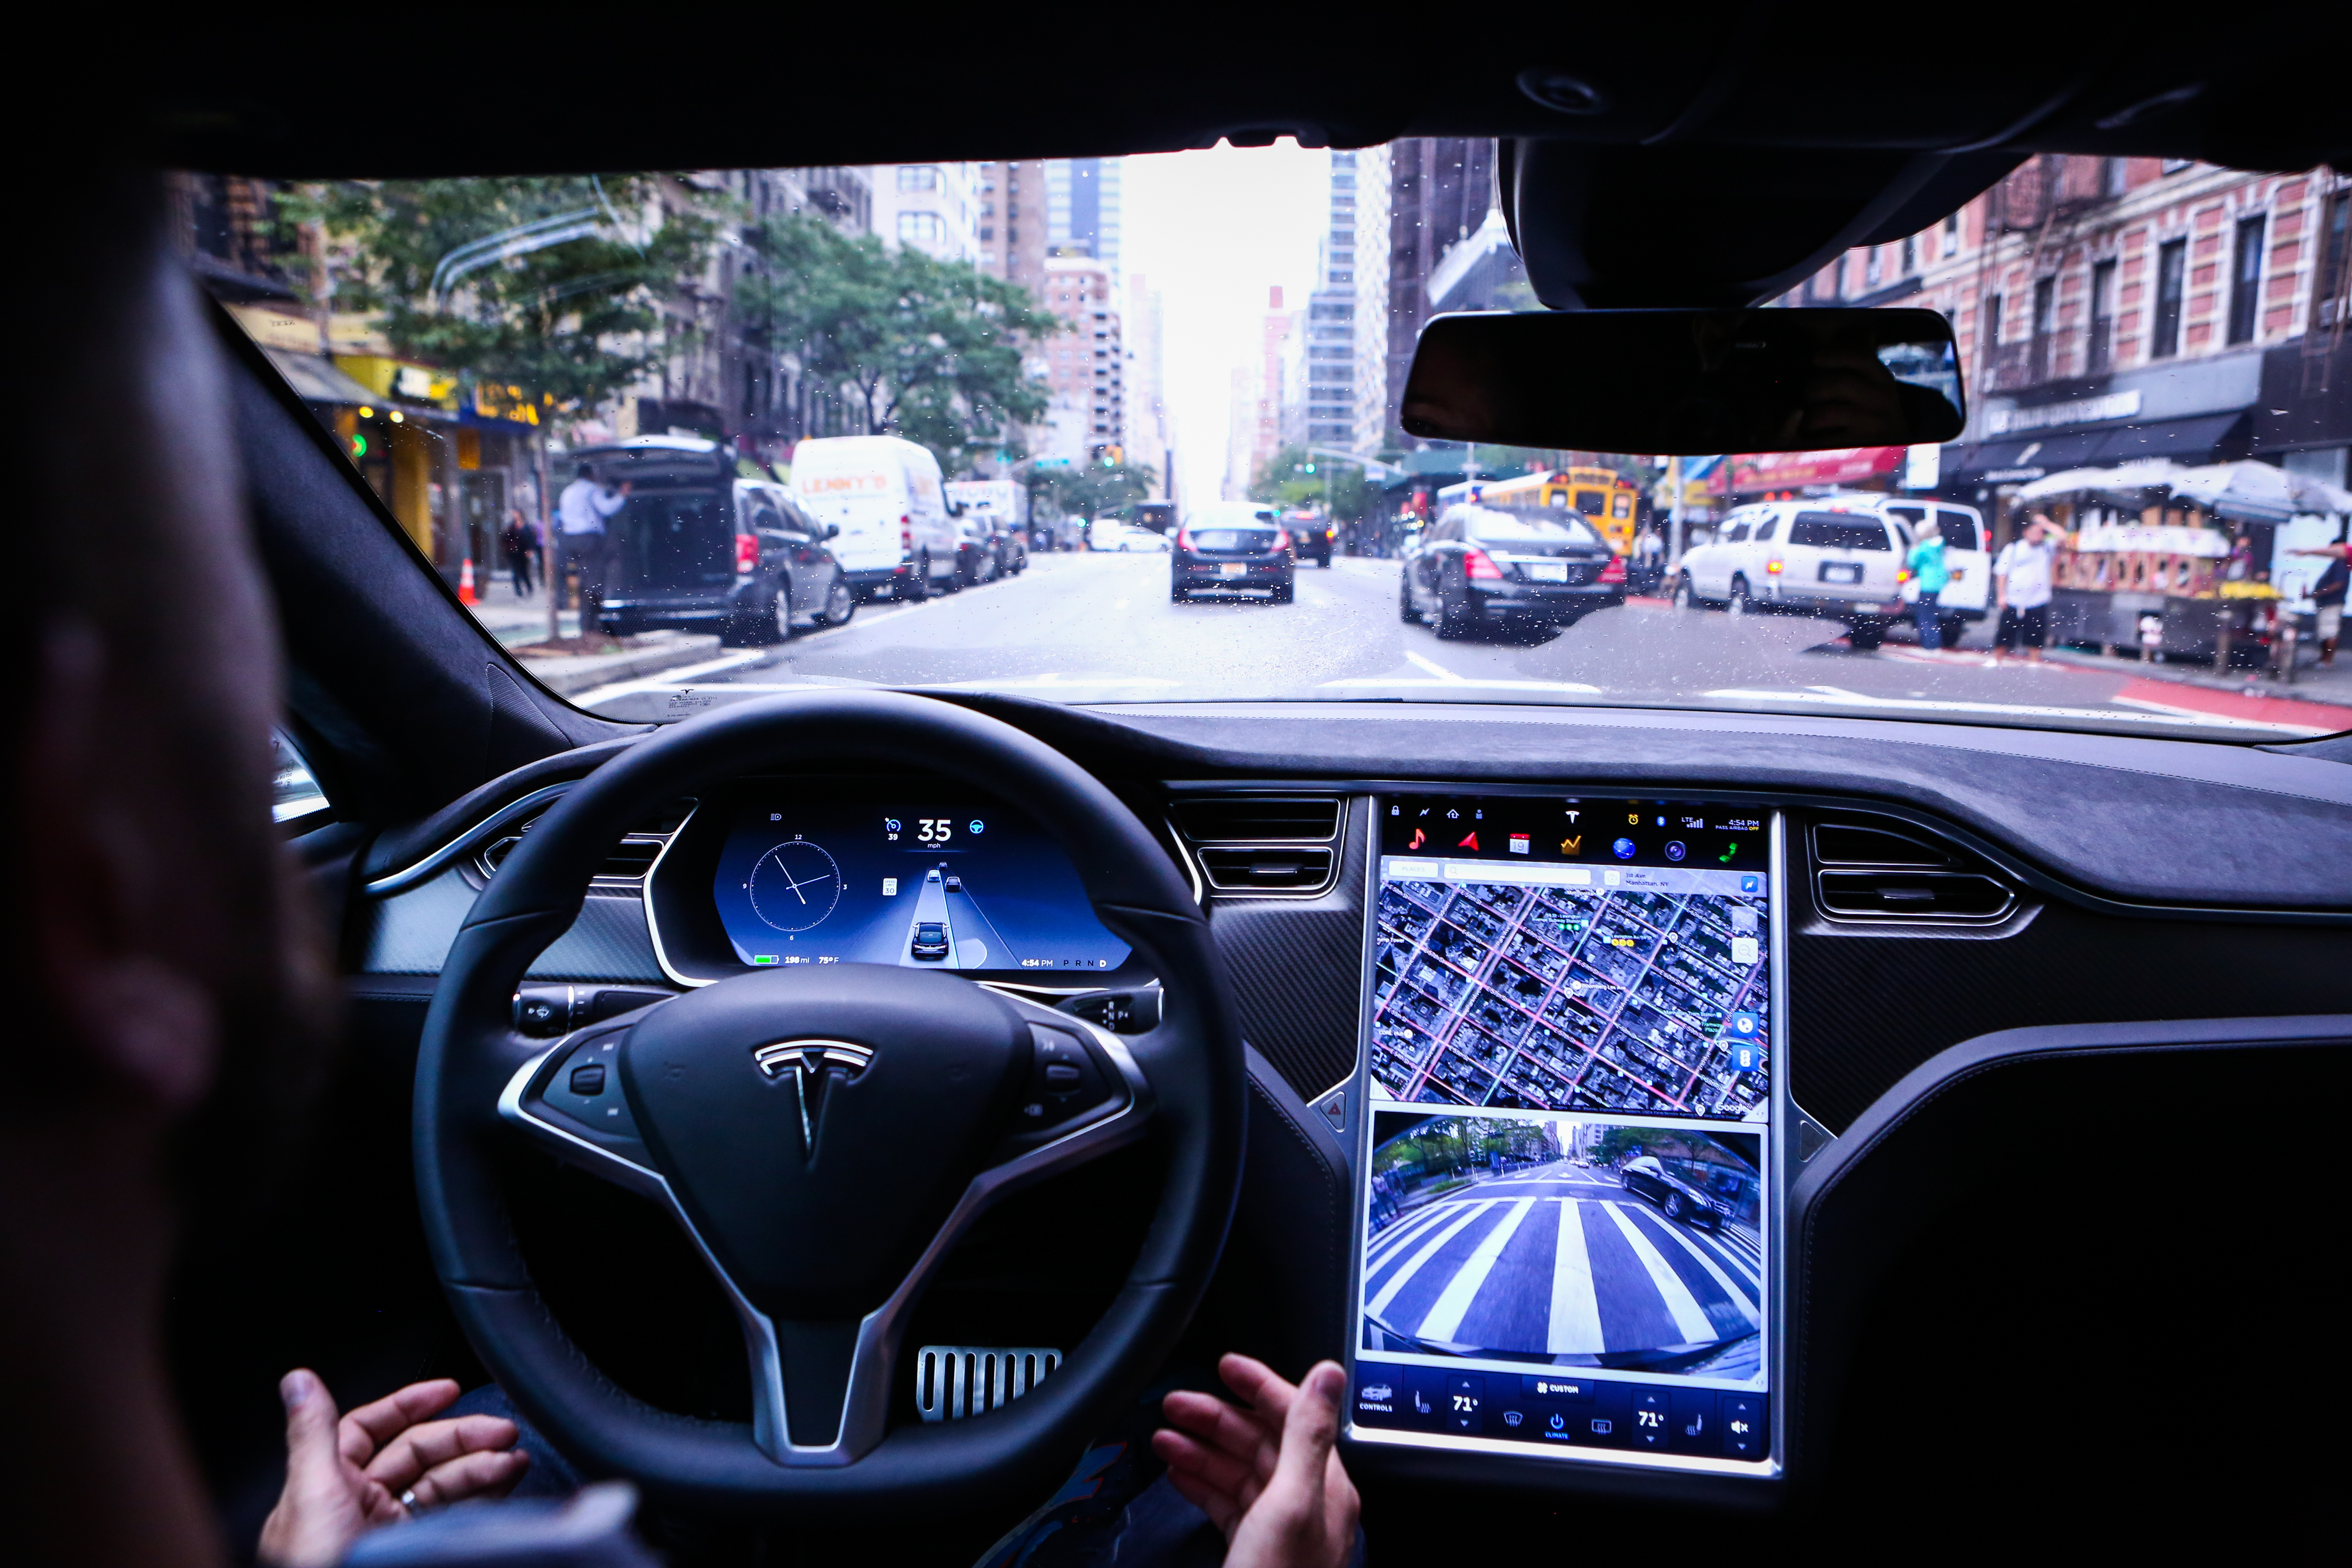 Connected cars from Tesla share information with a neural network that informs decisions made by autopilot